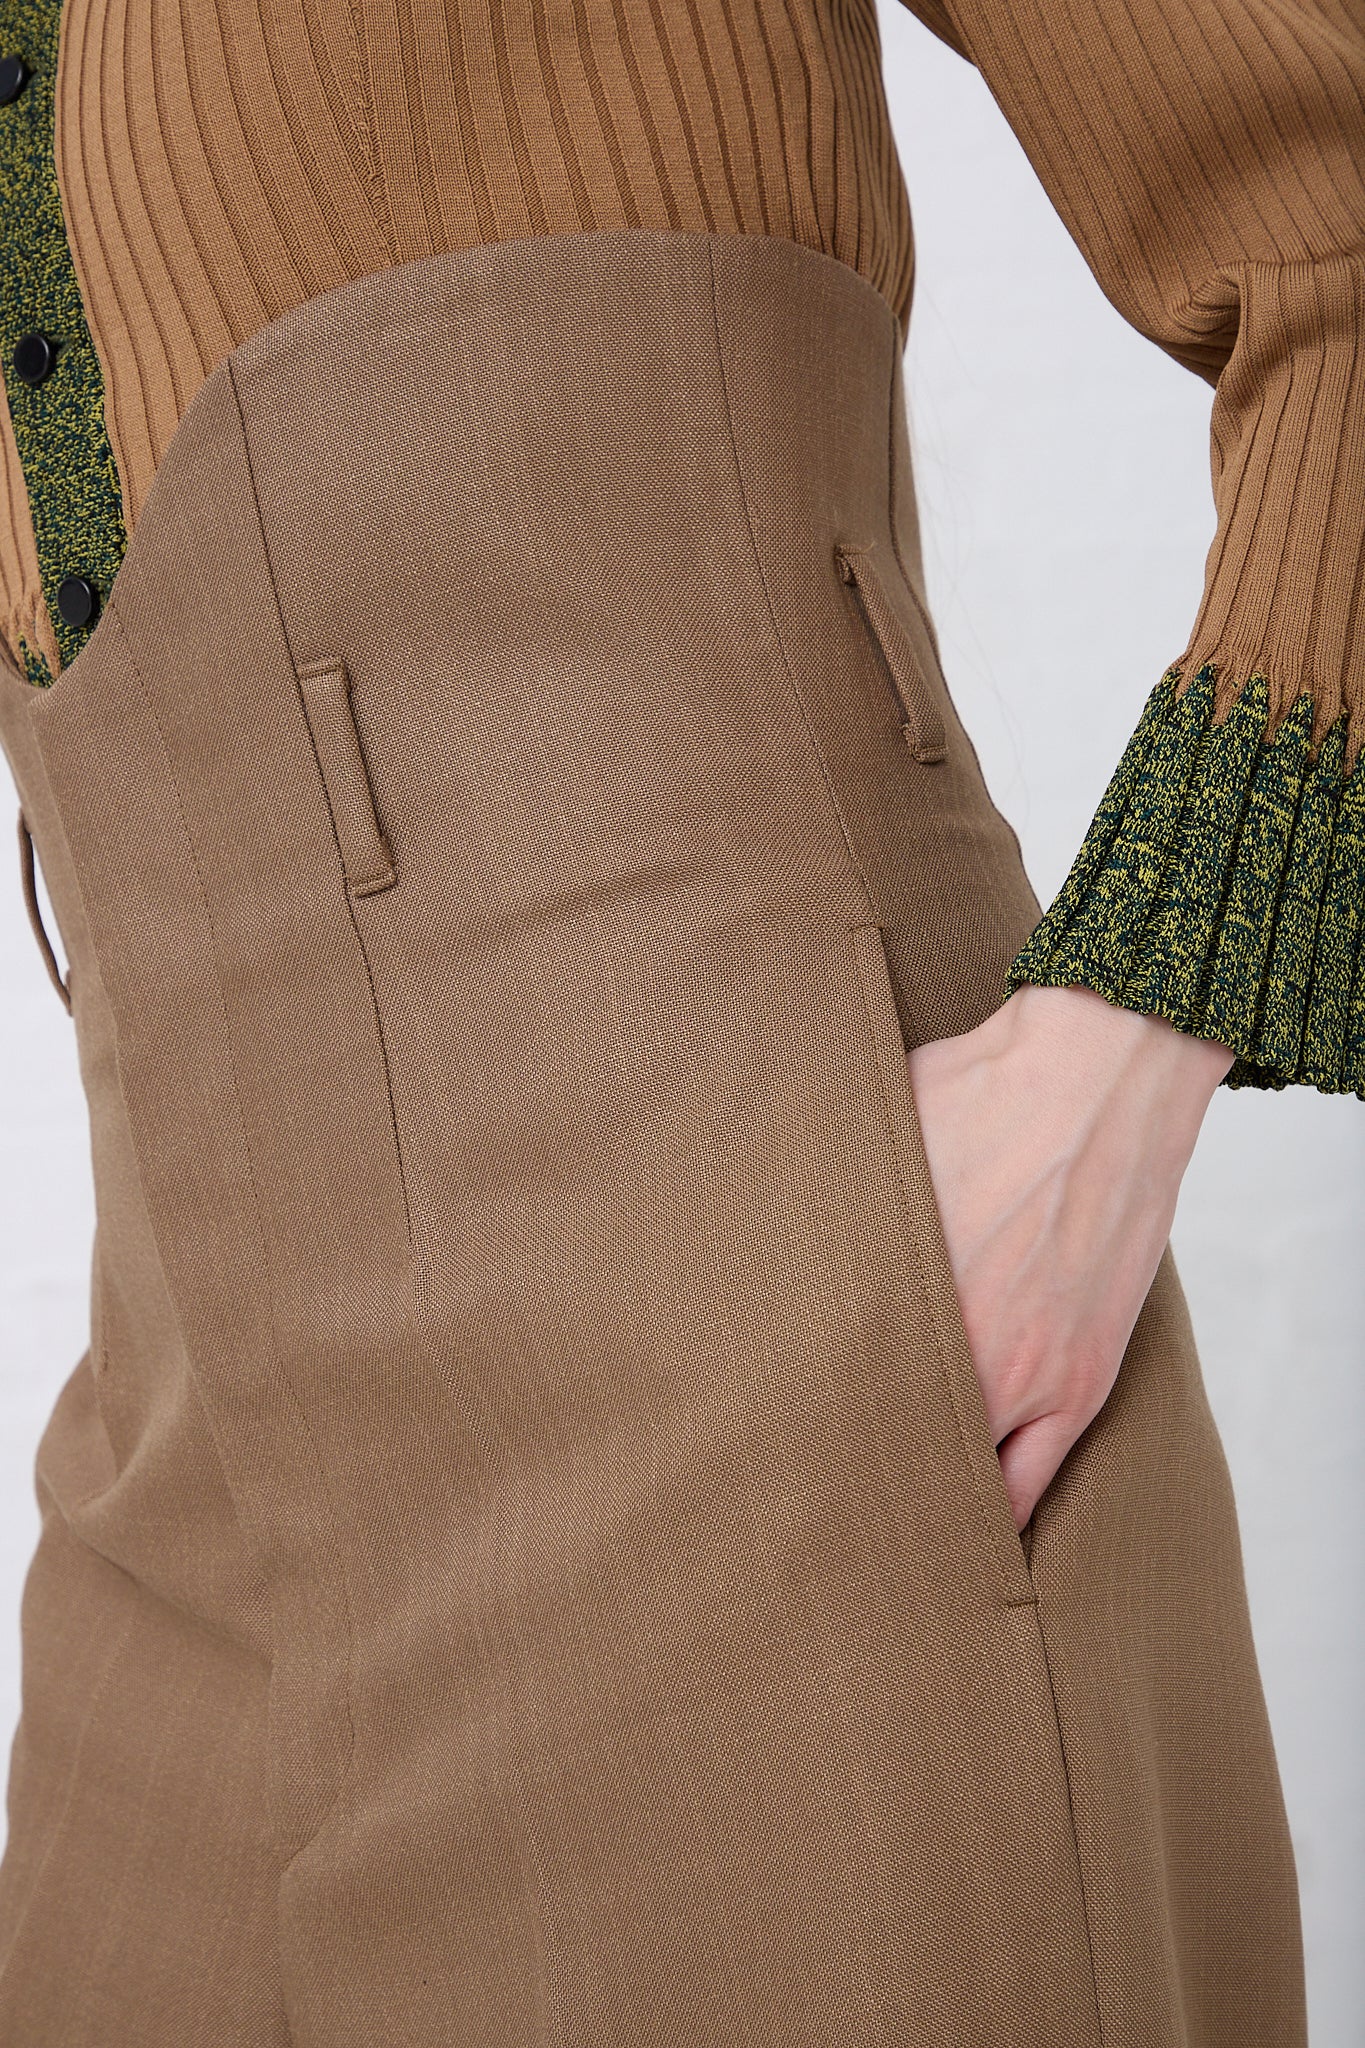 Close-up of a woman's side, showing her hand in the pocket of her TOGA ARCHIVES high waist trouser in Brown with visible stitching and a green blouse with intricate sleeve details.